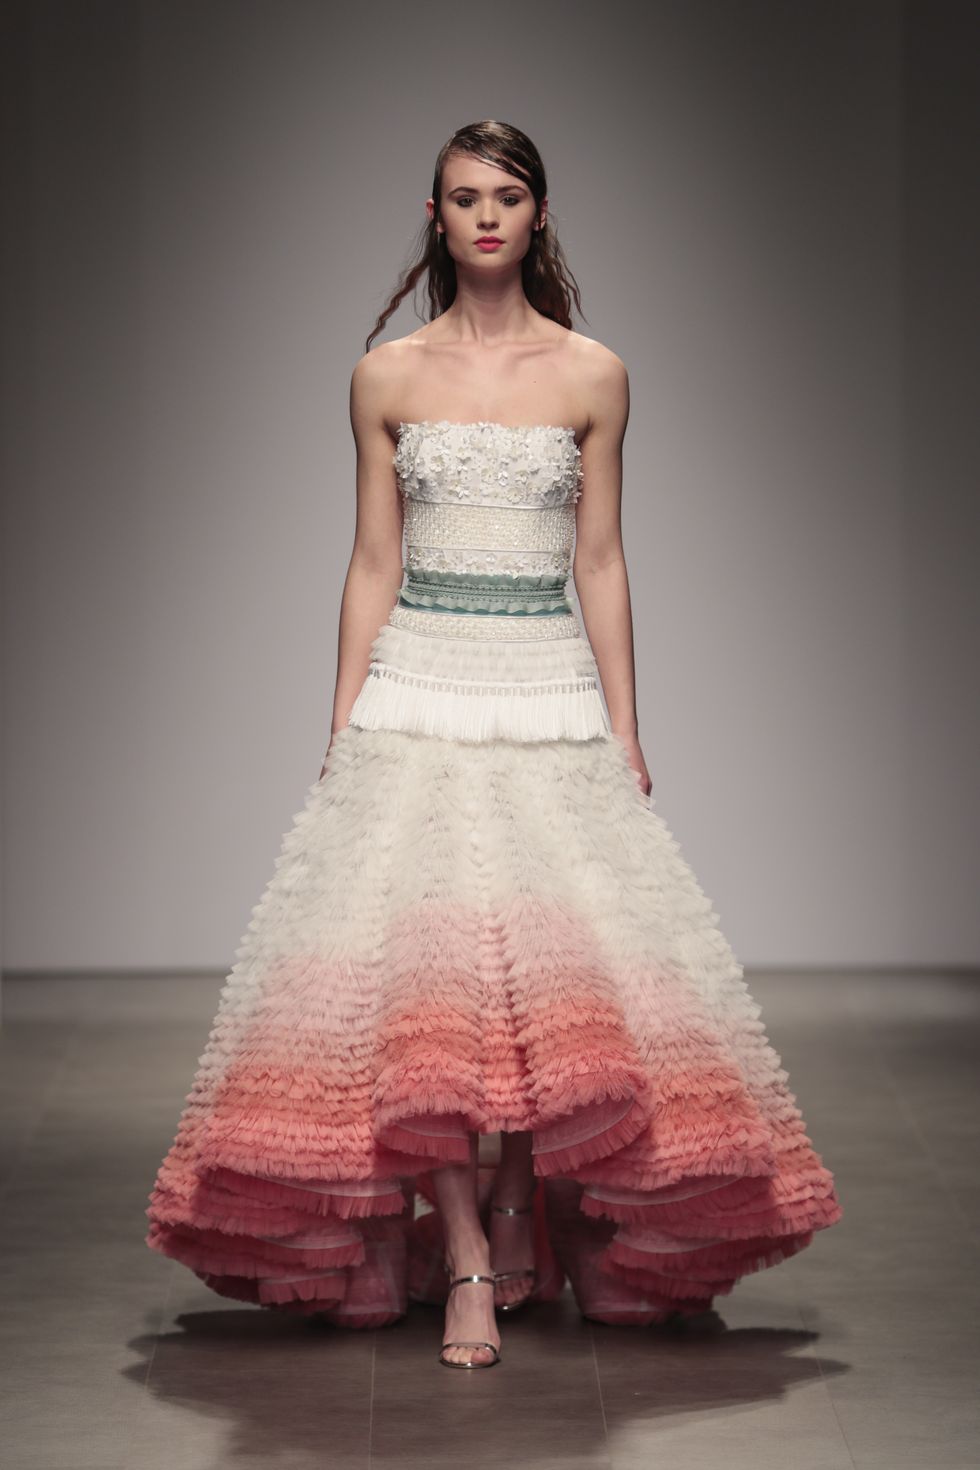 Fashion model, Dress, Gown, Clothing, Fashion, Pink, Haute couture, Fashion show, Strapless dress, Beauty, 